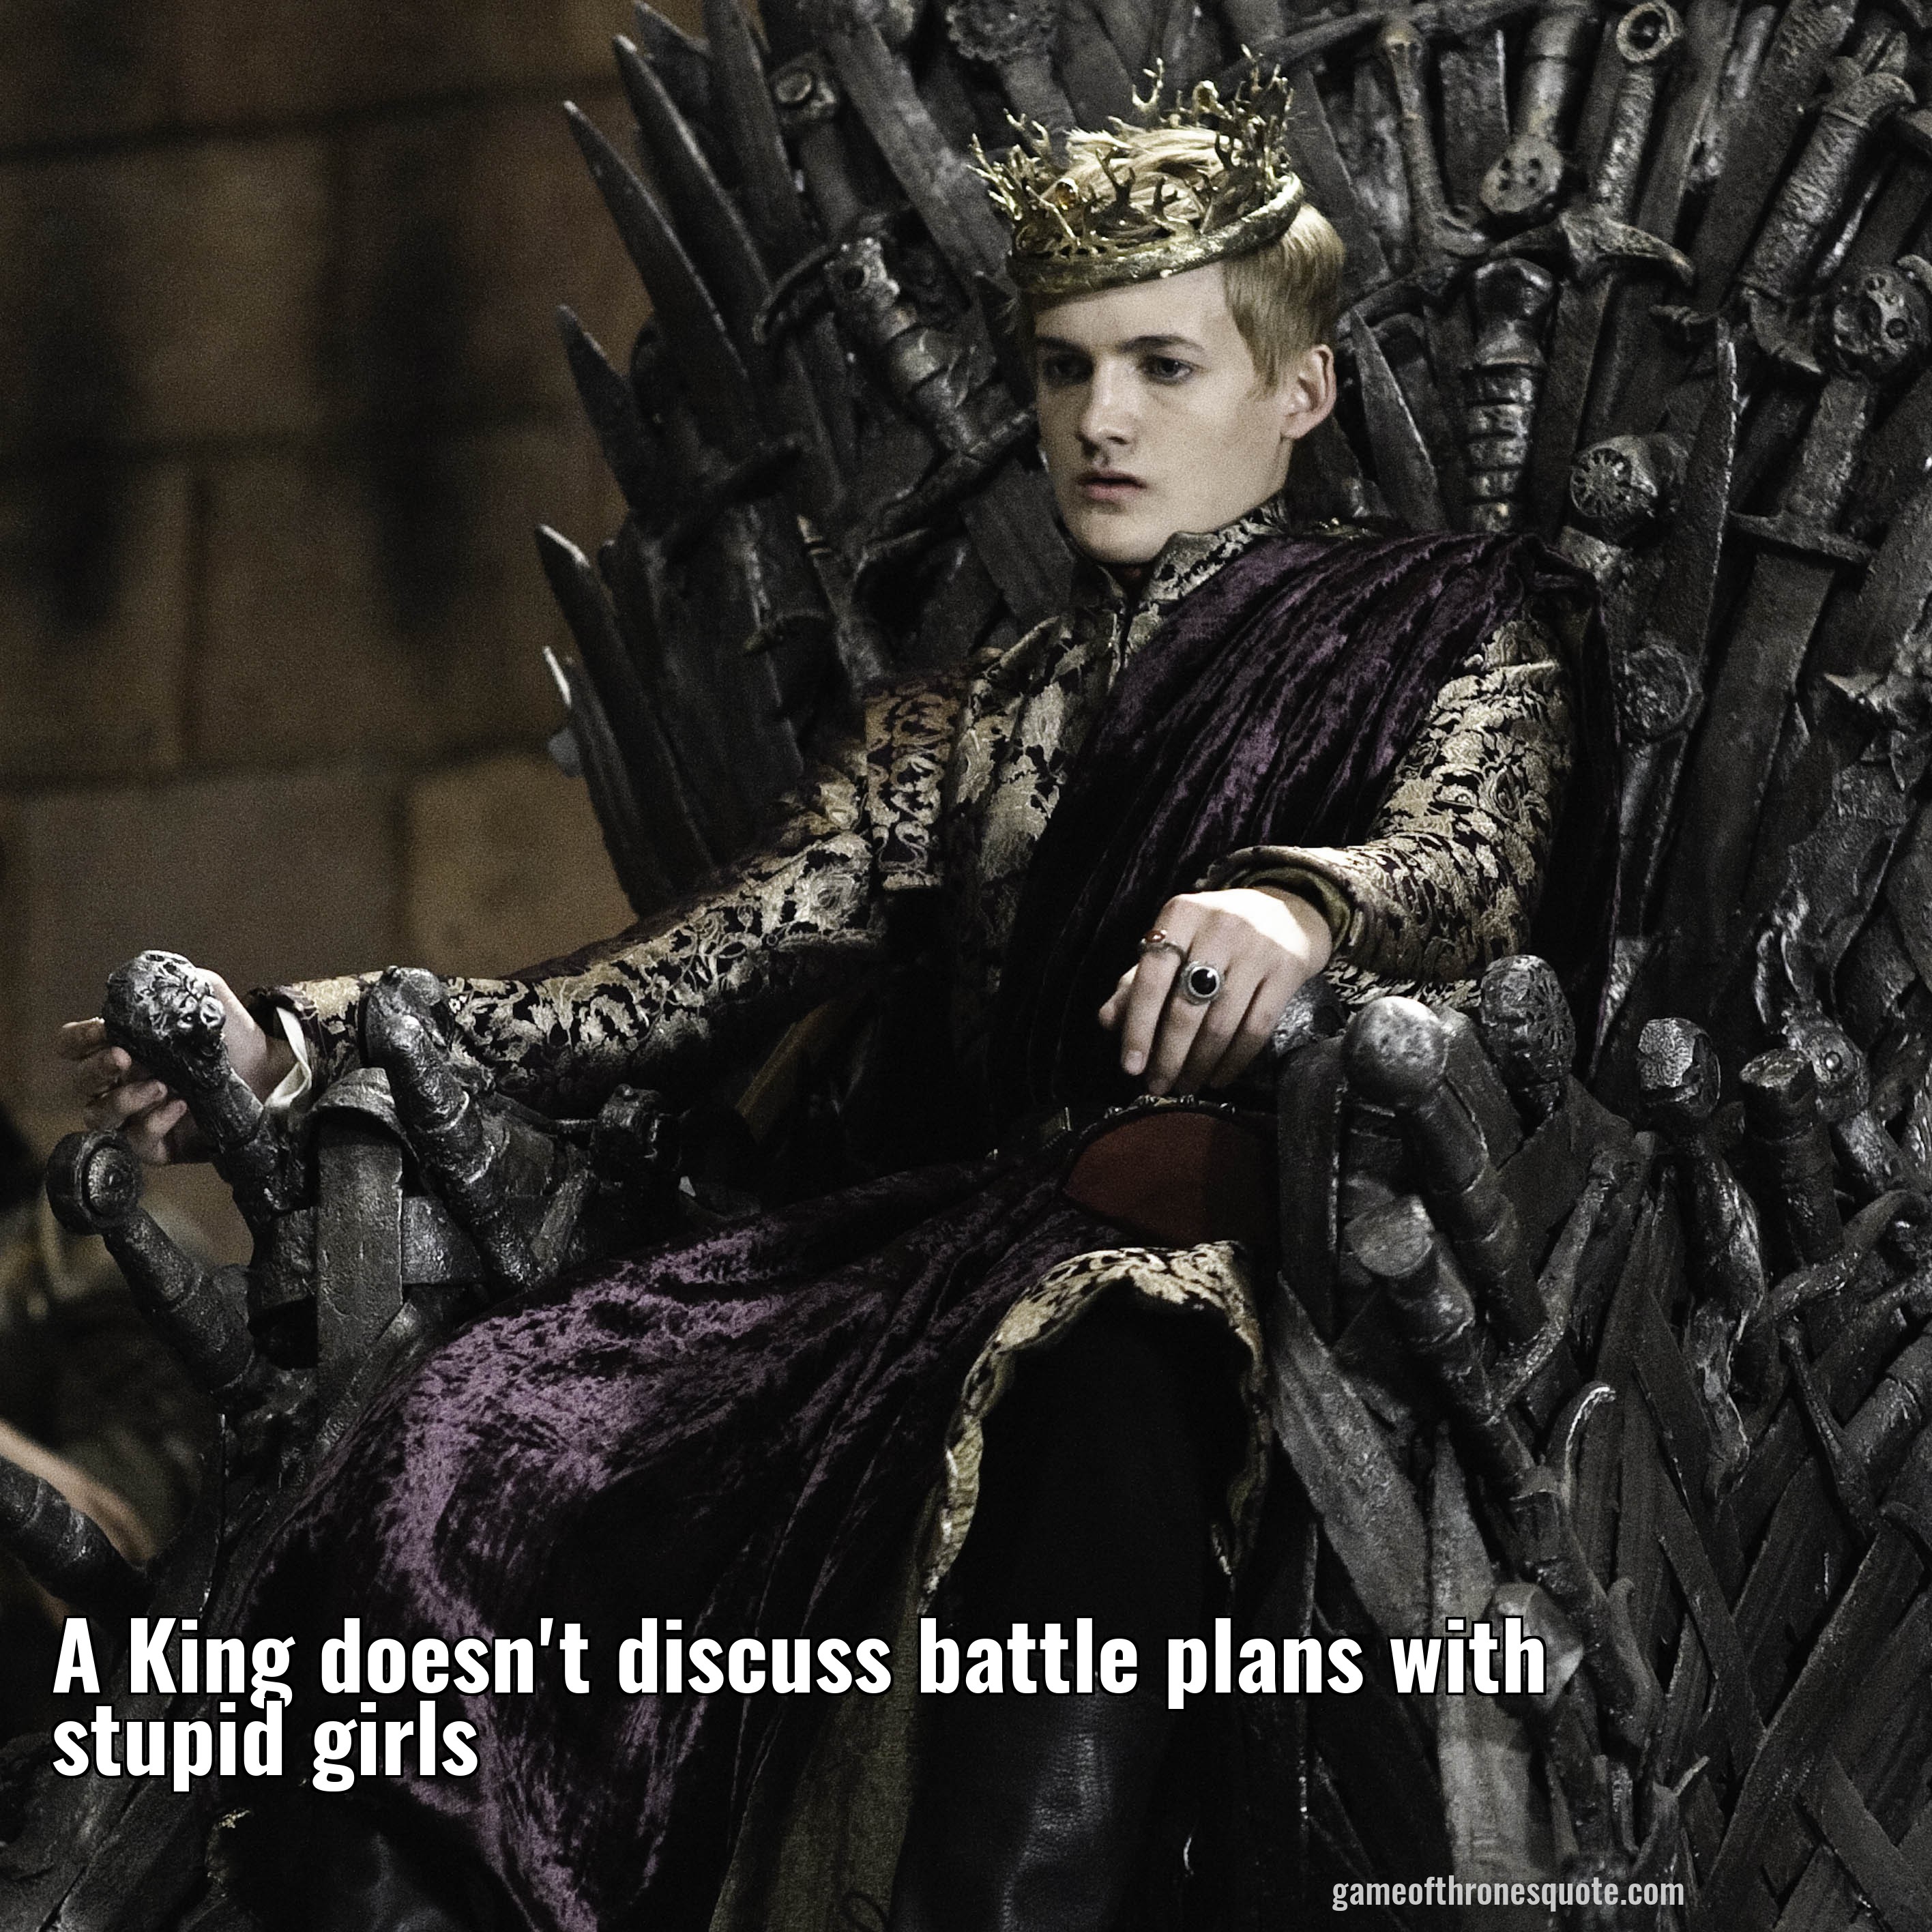 A King doesn't discuss battle plans with stupid girls